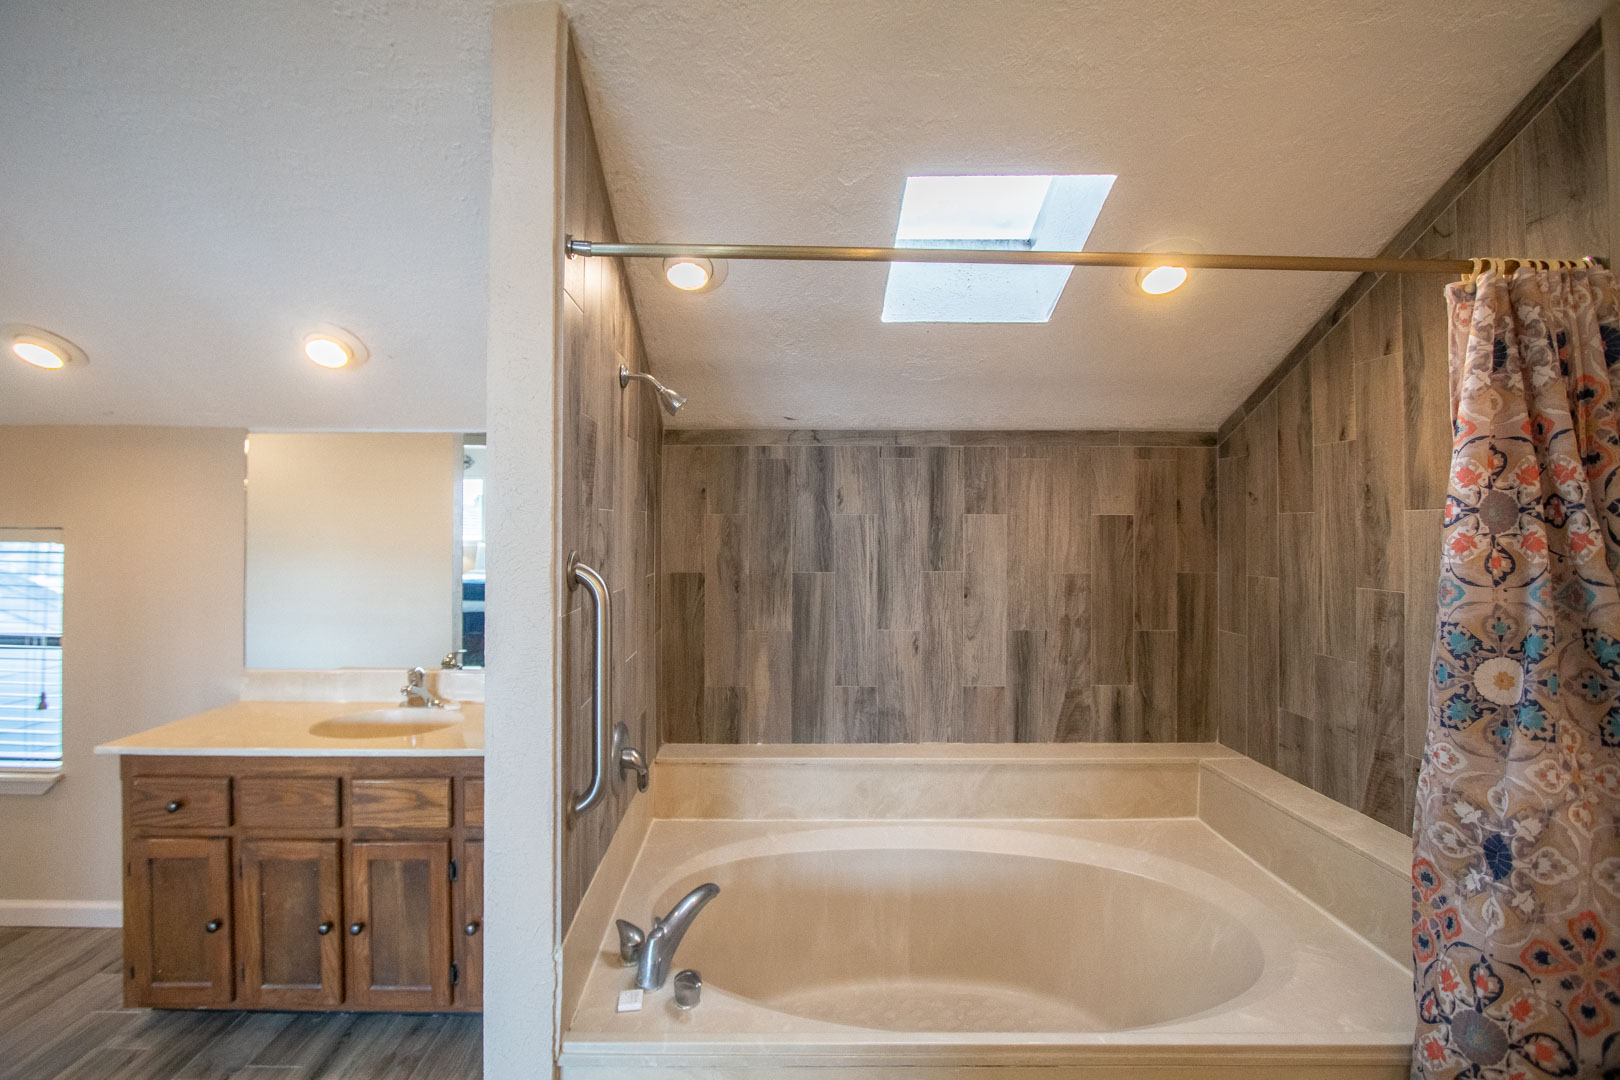 A spacious bathroom at VRI's The Landing at Seven Coves in Willis, Texas.